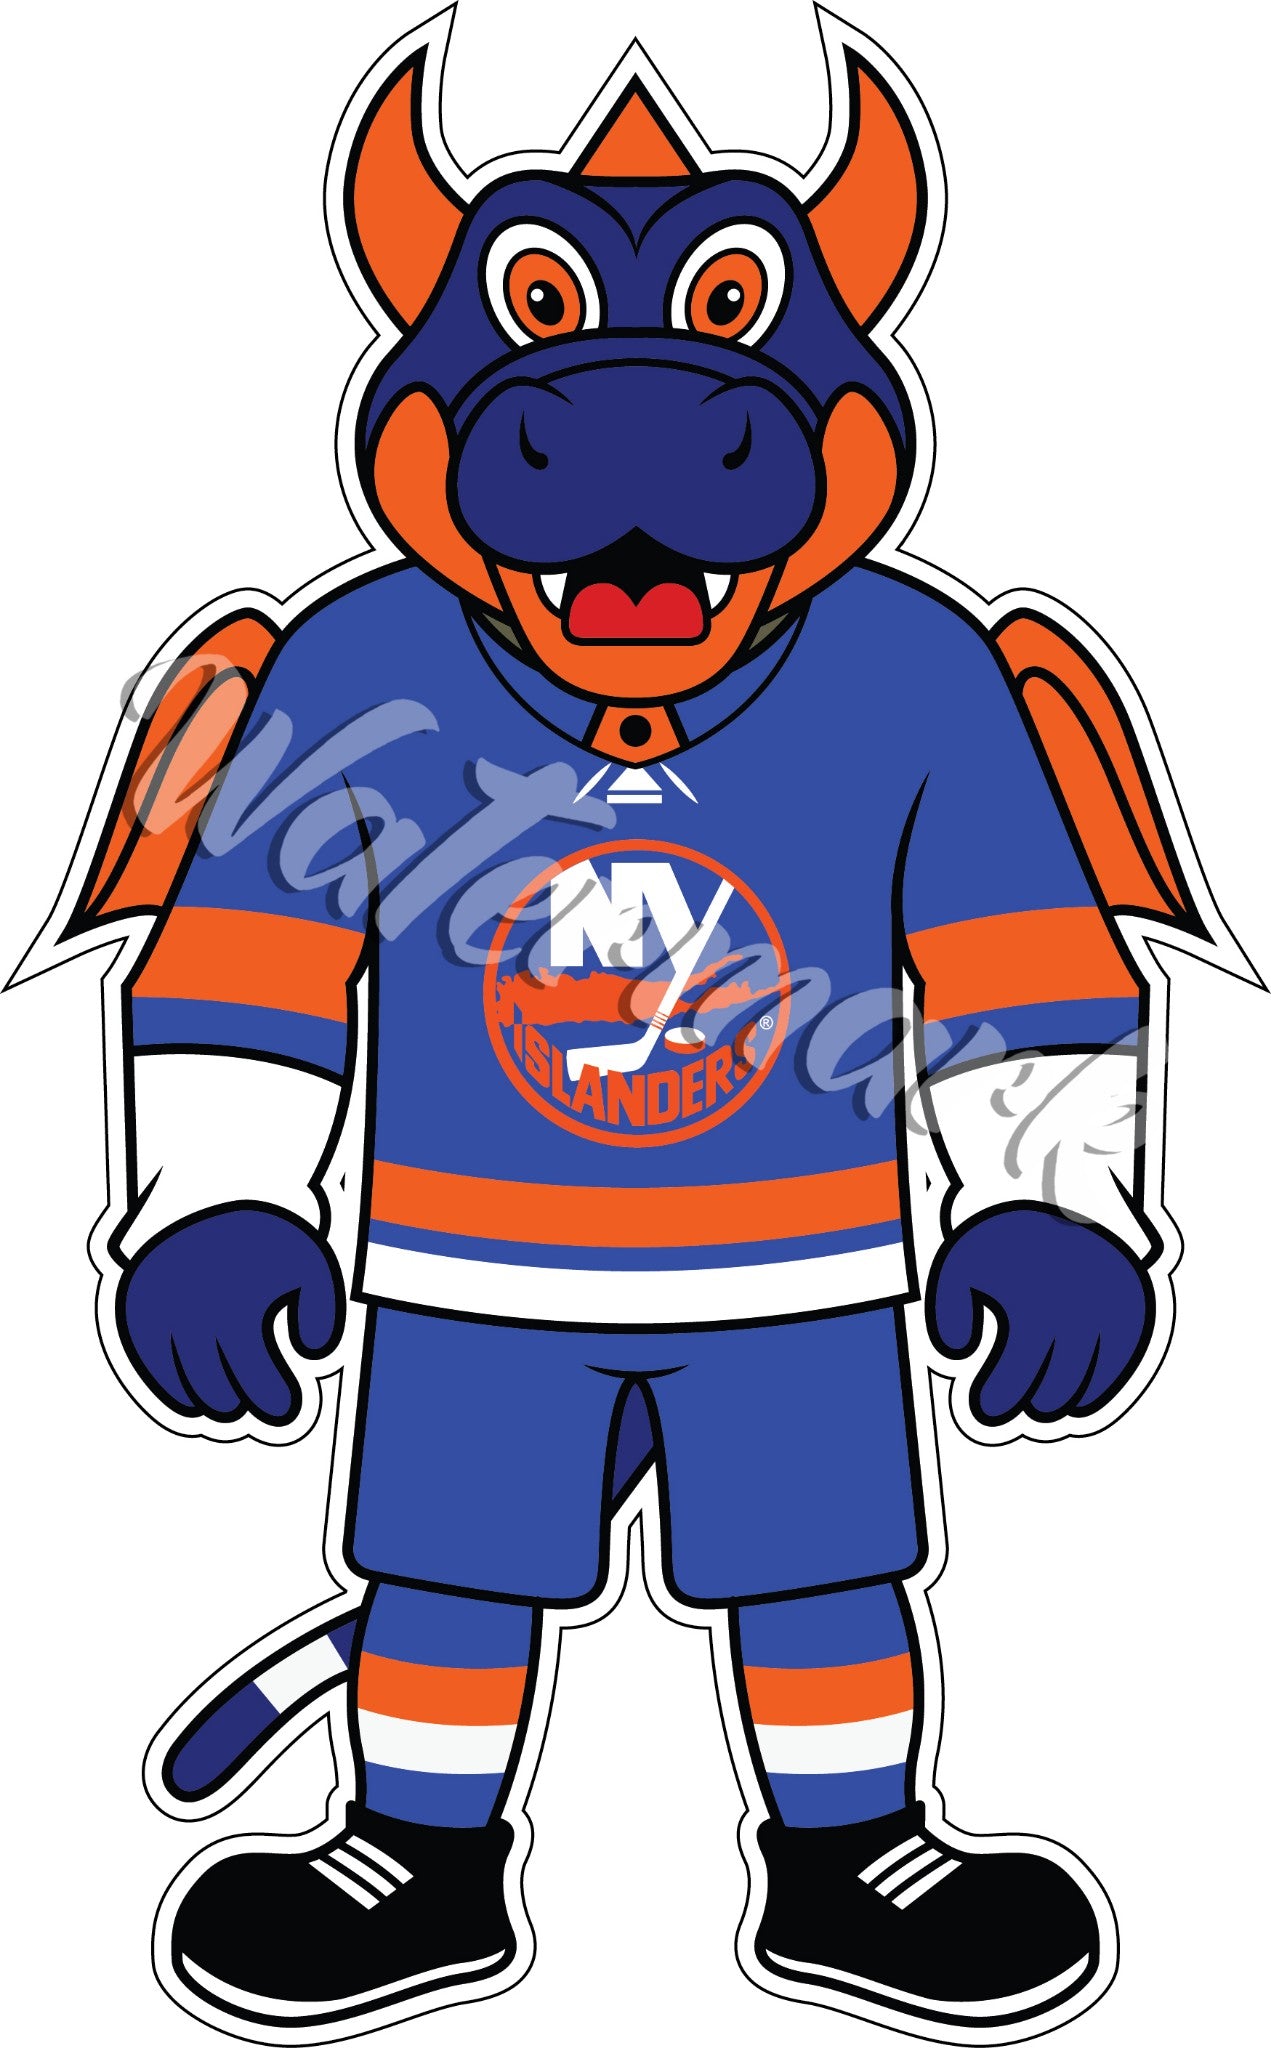 New York Islanders mascot Sparky celebrates the victory over the